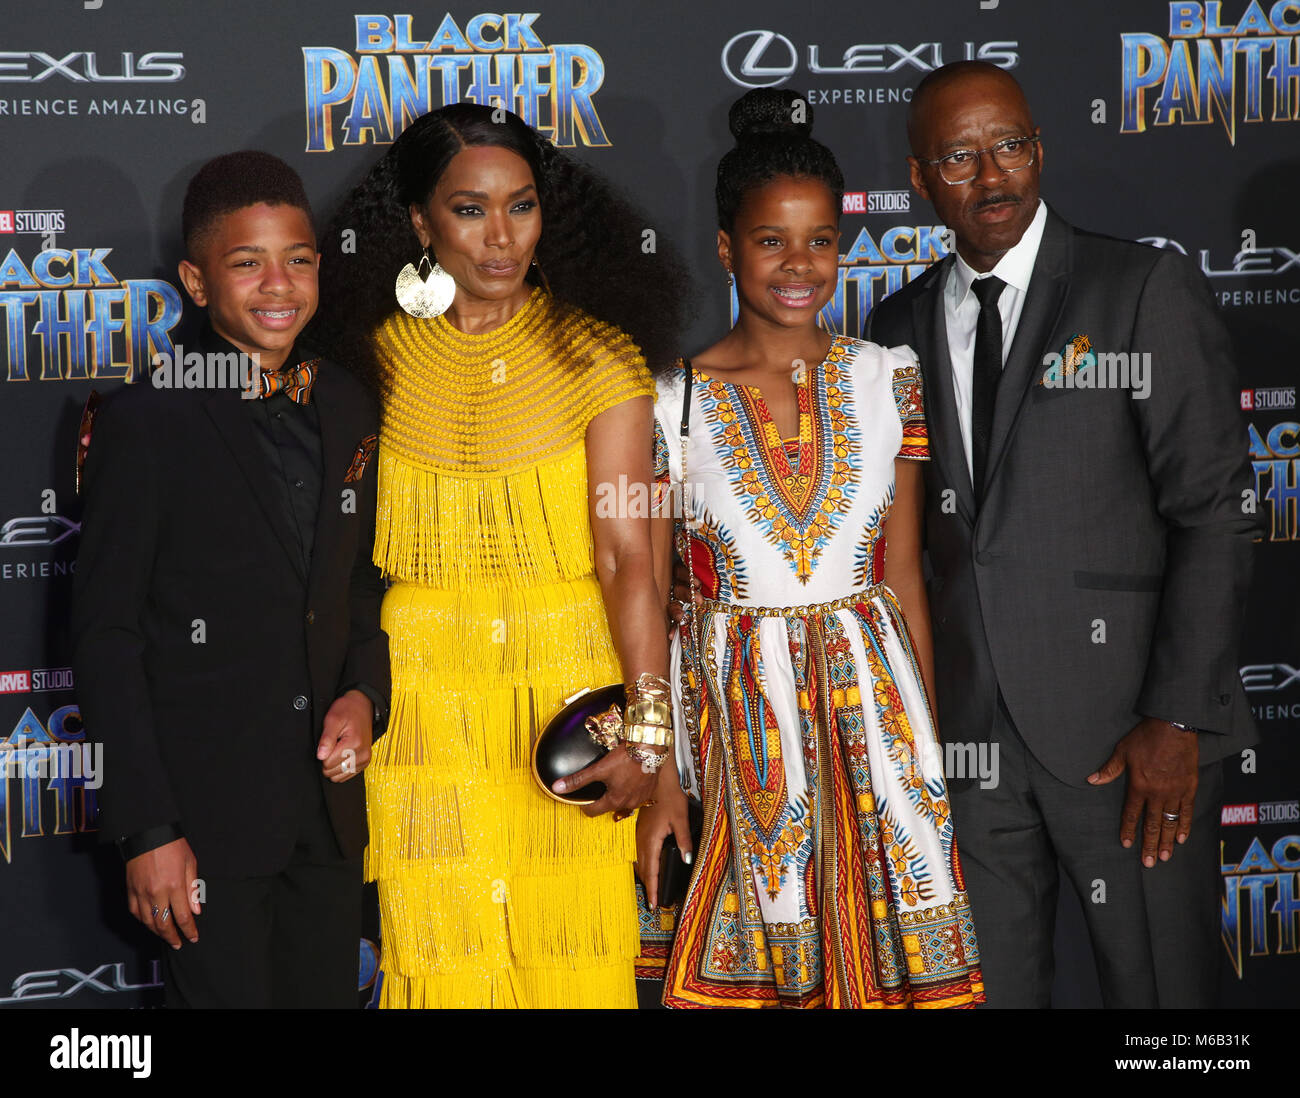 Celebrities attend  World Premiere of Marvel Studios Black Panther at Dolby Theatre.  Featuring: Slater Vance, Angela Bassett, Bronwyn Vance, Courtney B. Vance Where: Los Angeles, California, United States When: 30 Jan 2018 Credit: Brian To/WENN.com Stock Photo